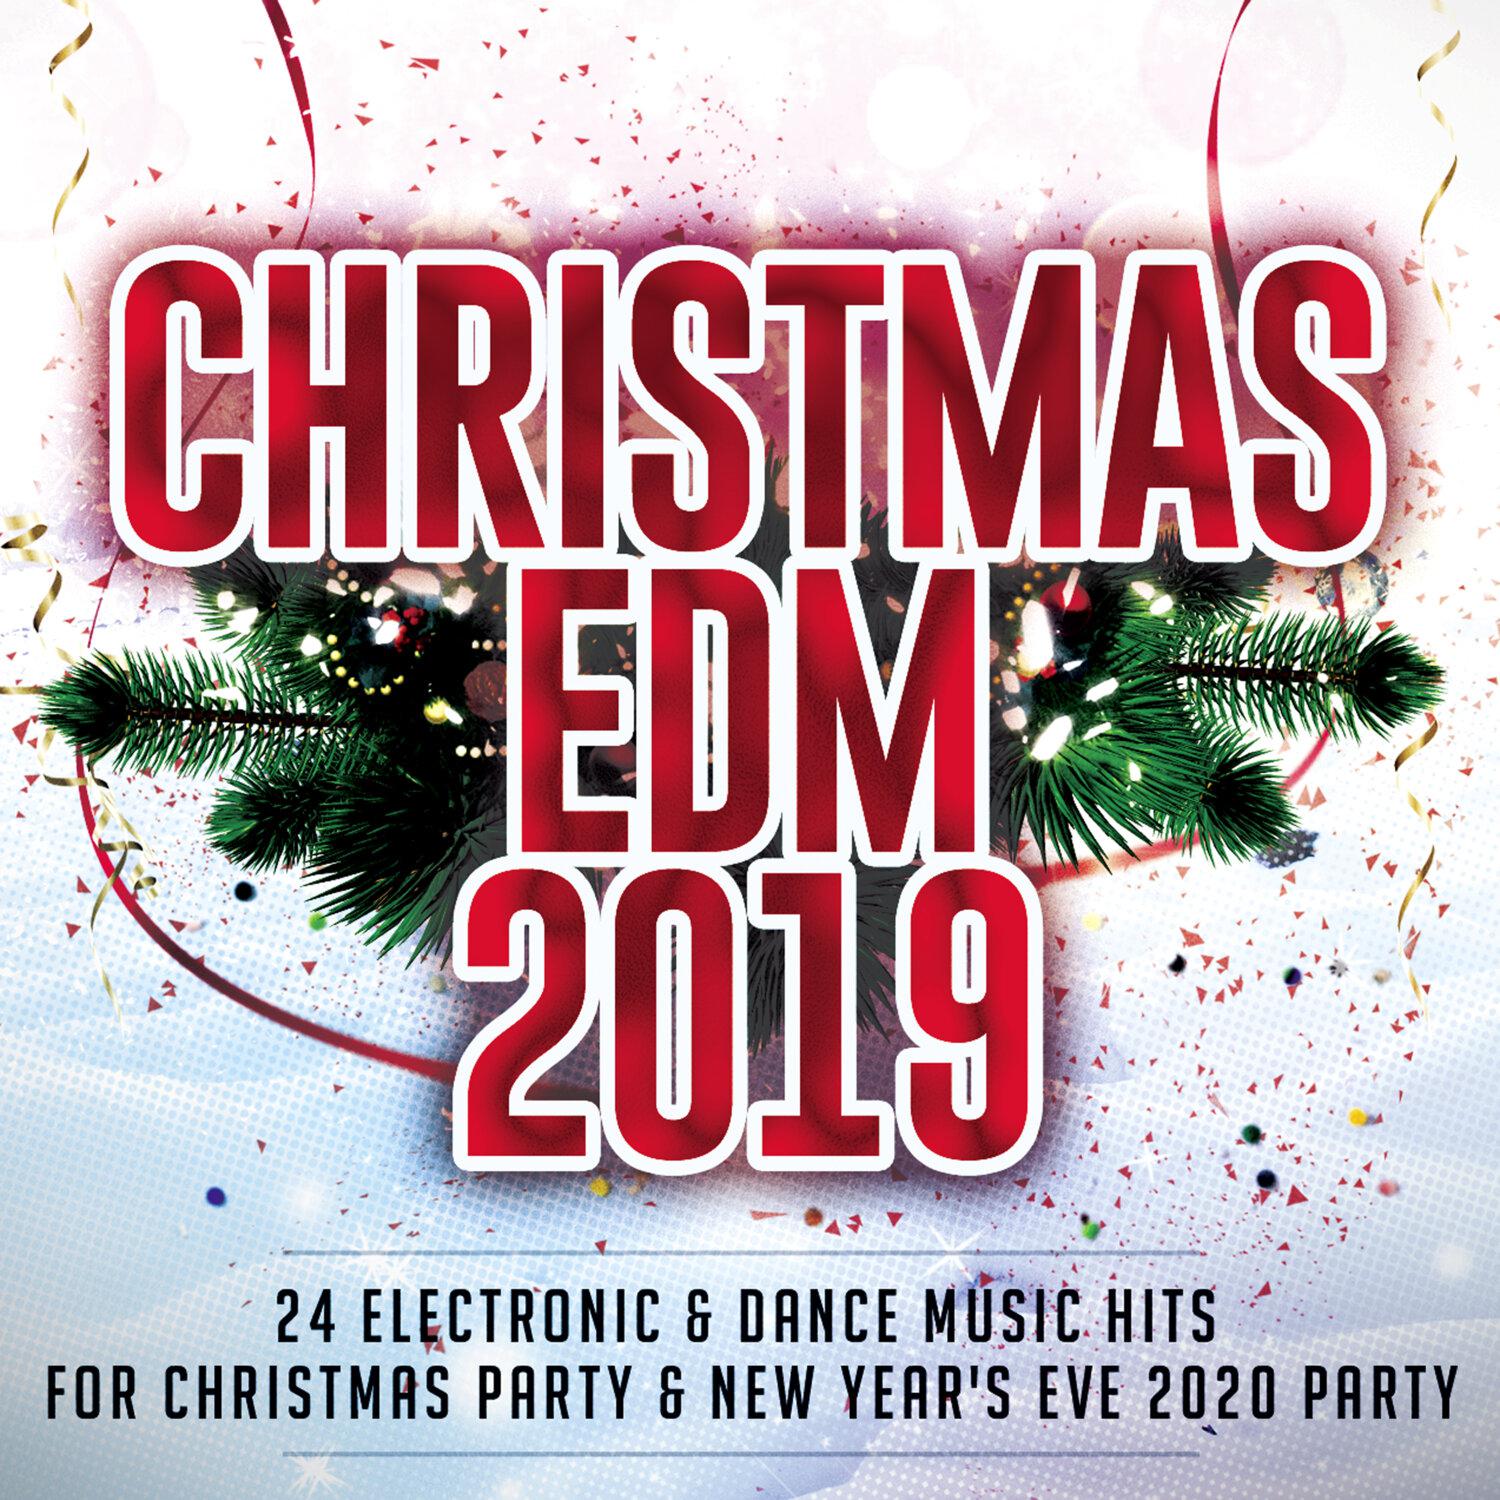 Постер альбома Christmas EDM 2019 - 24 Electronic & Dance Music Hits for Christmas Party & New Year's Eve 2020 Party.